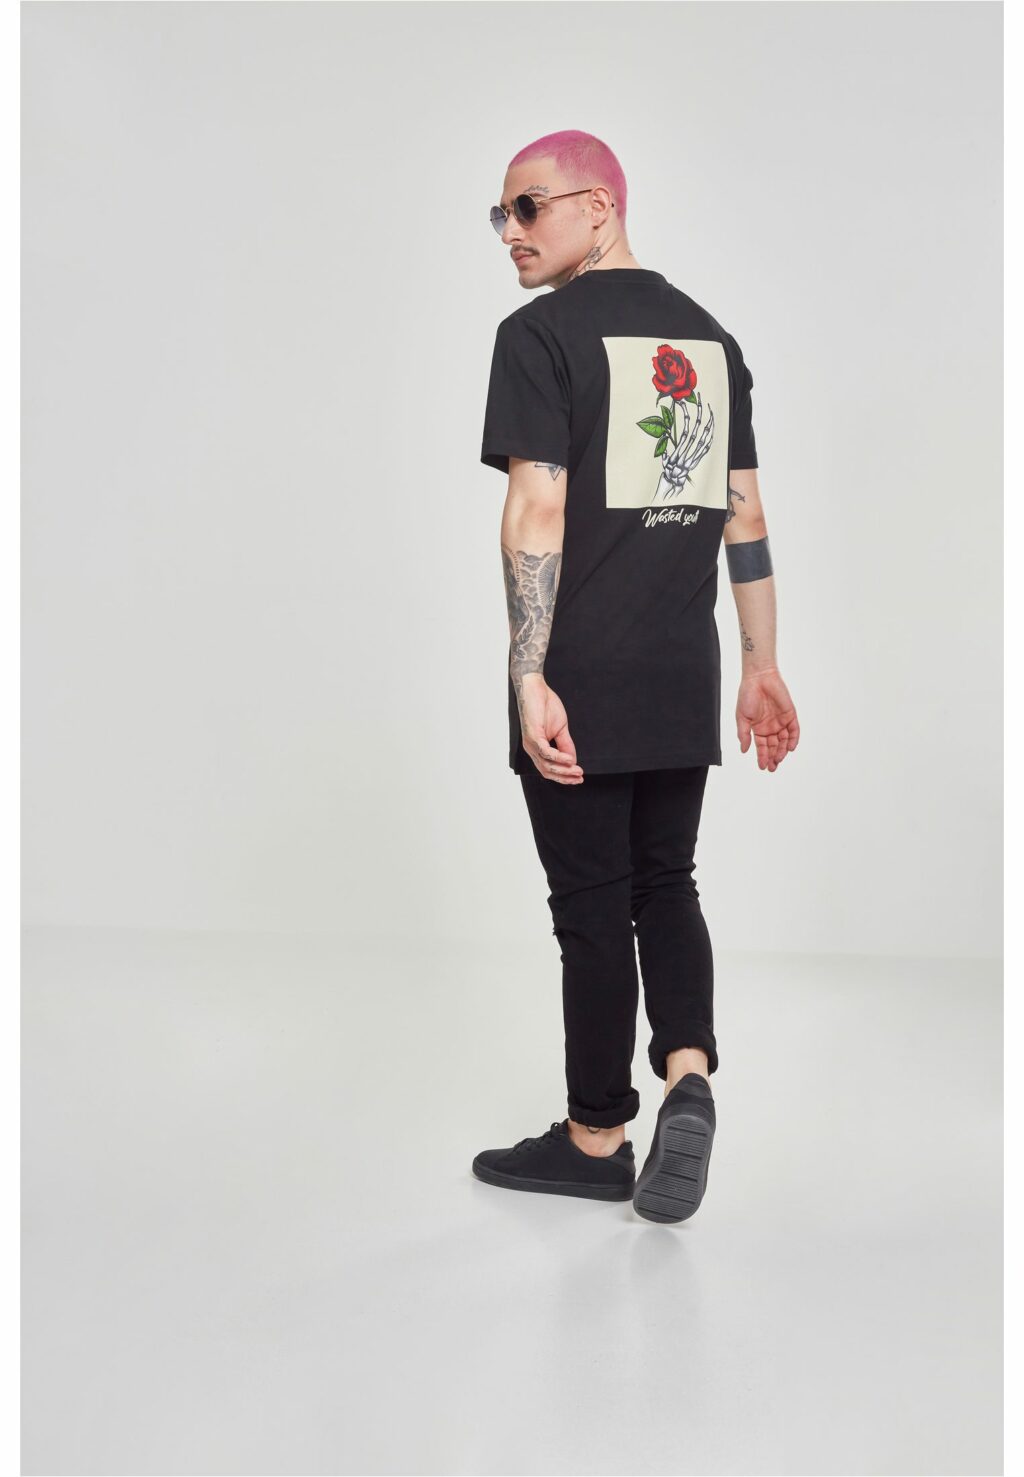 Wasted Youth Tee black MT719